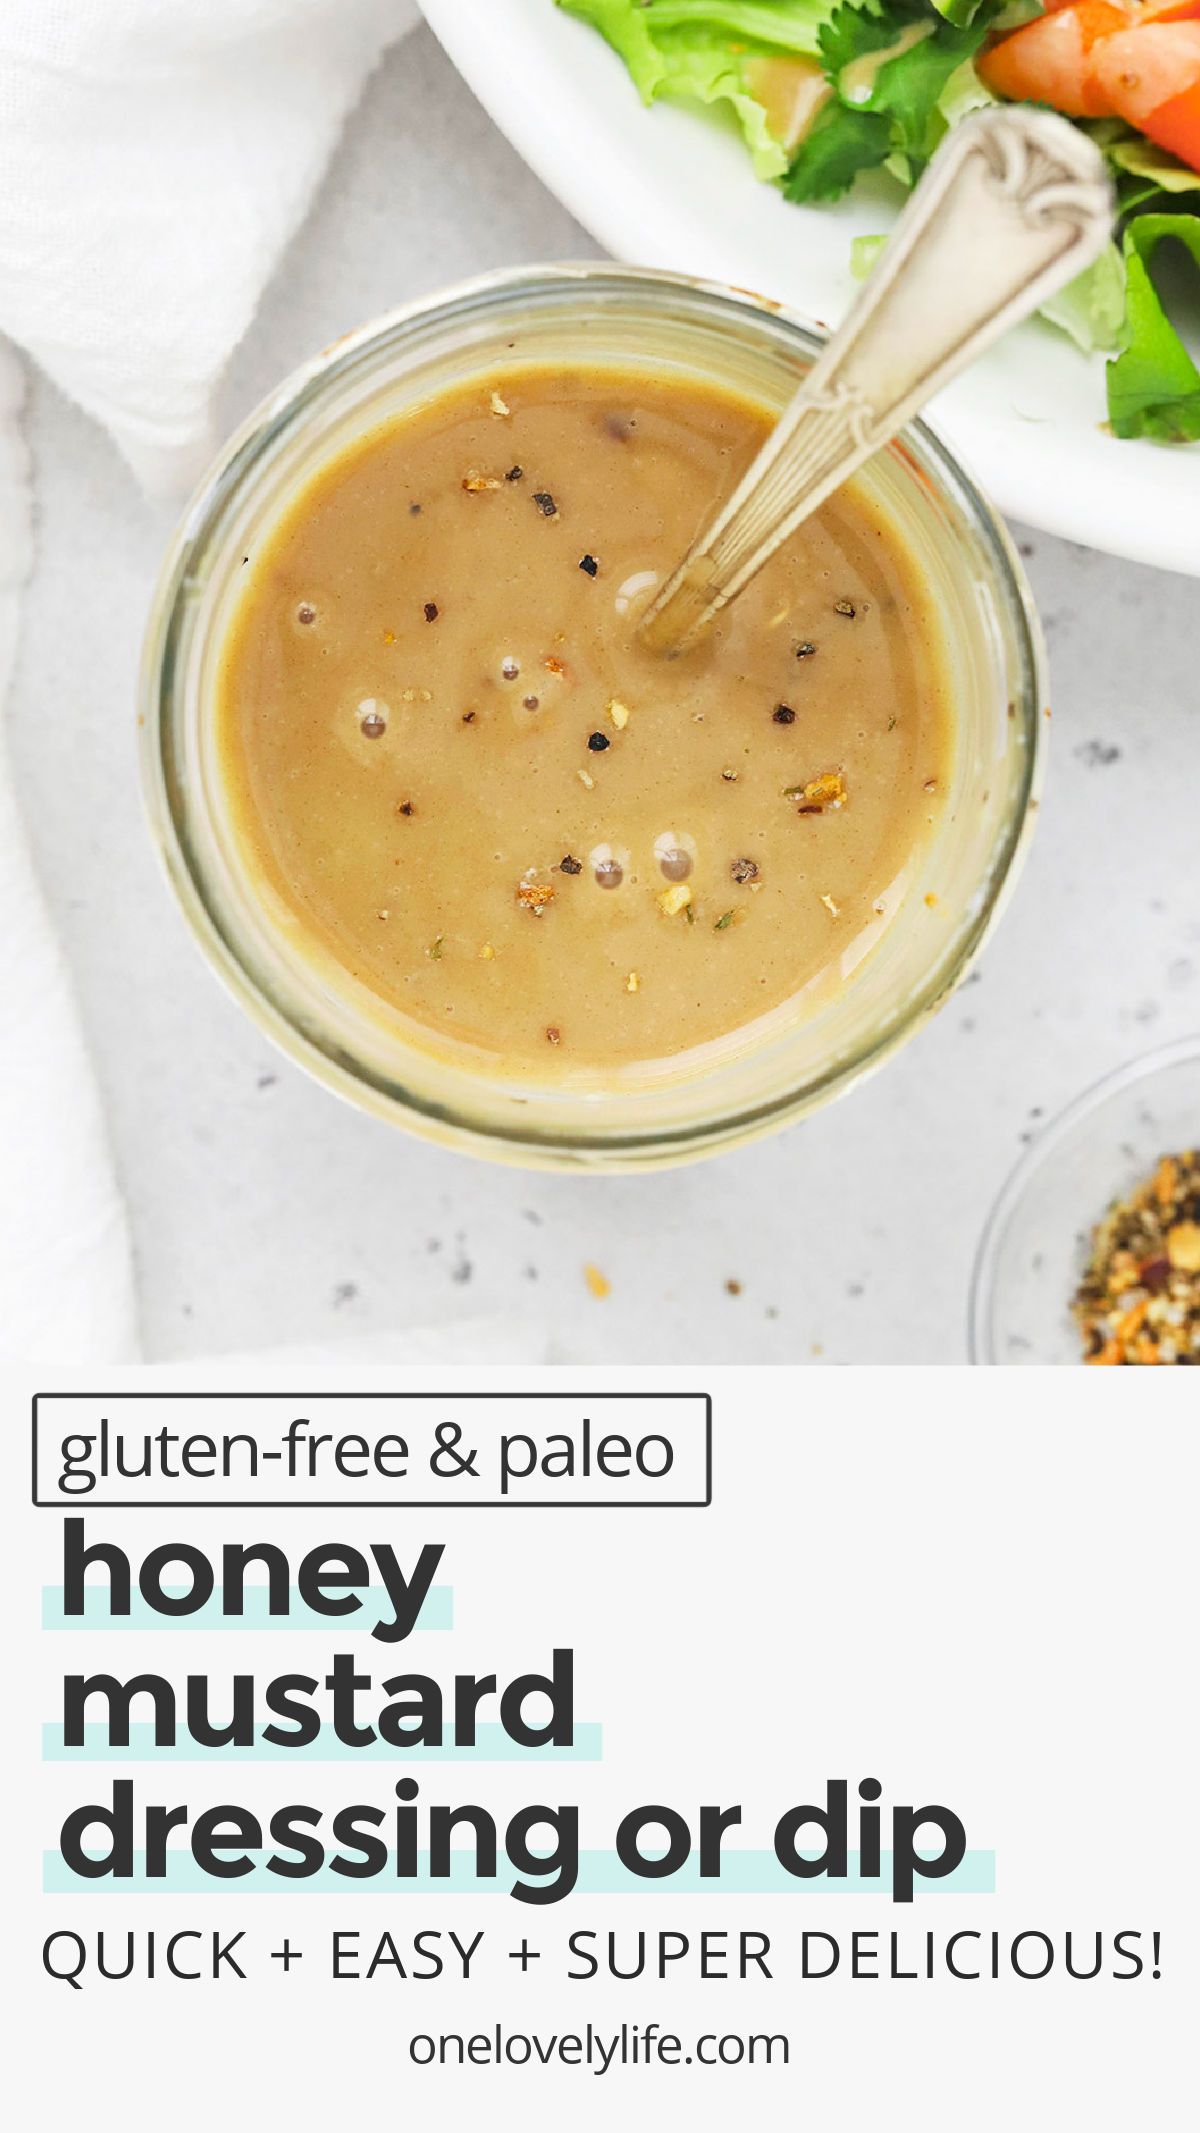 Honey Mustard Dressing - Add a tangy zip to your favorite salad, sandwich, or chicken with our homemade honey mustard dip or dressing! (Gluten-Free, Paleo-Friendly) // honey mustard dressing recipe // paleo honey mustard // easy honey mustard // honey mustard dipping sauce recipe // honey mustard dip recipe // vegan honey mustard // vegetarian honey mustard // the best honey mustard dressing // chicken dipping sauce // cobb salad dressing // honey mustard sauce